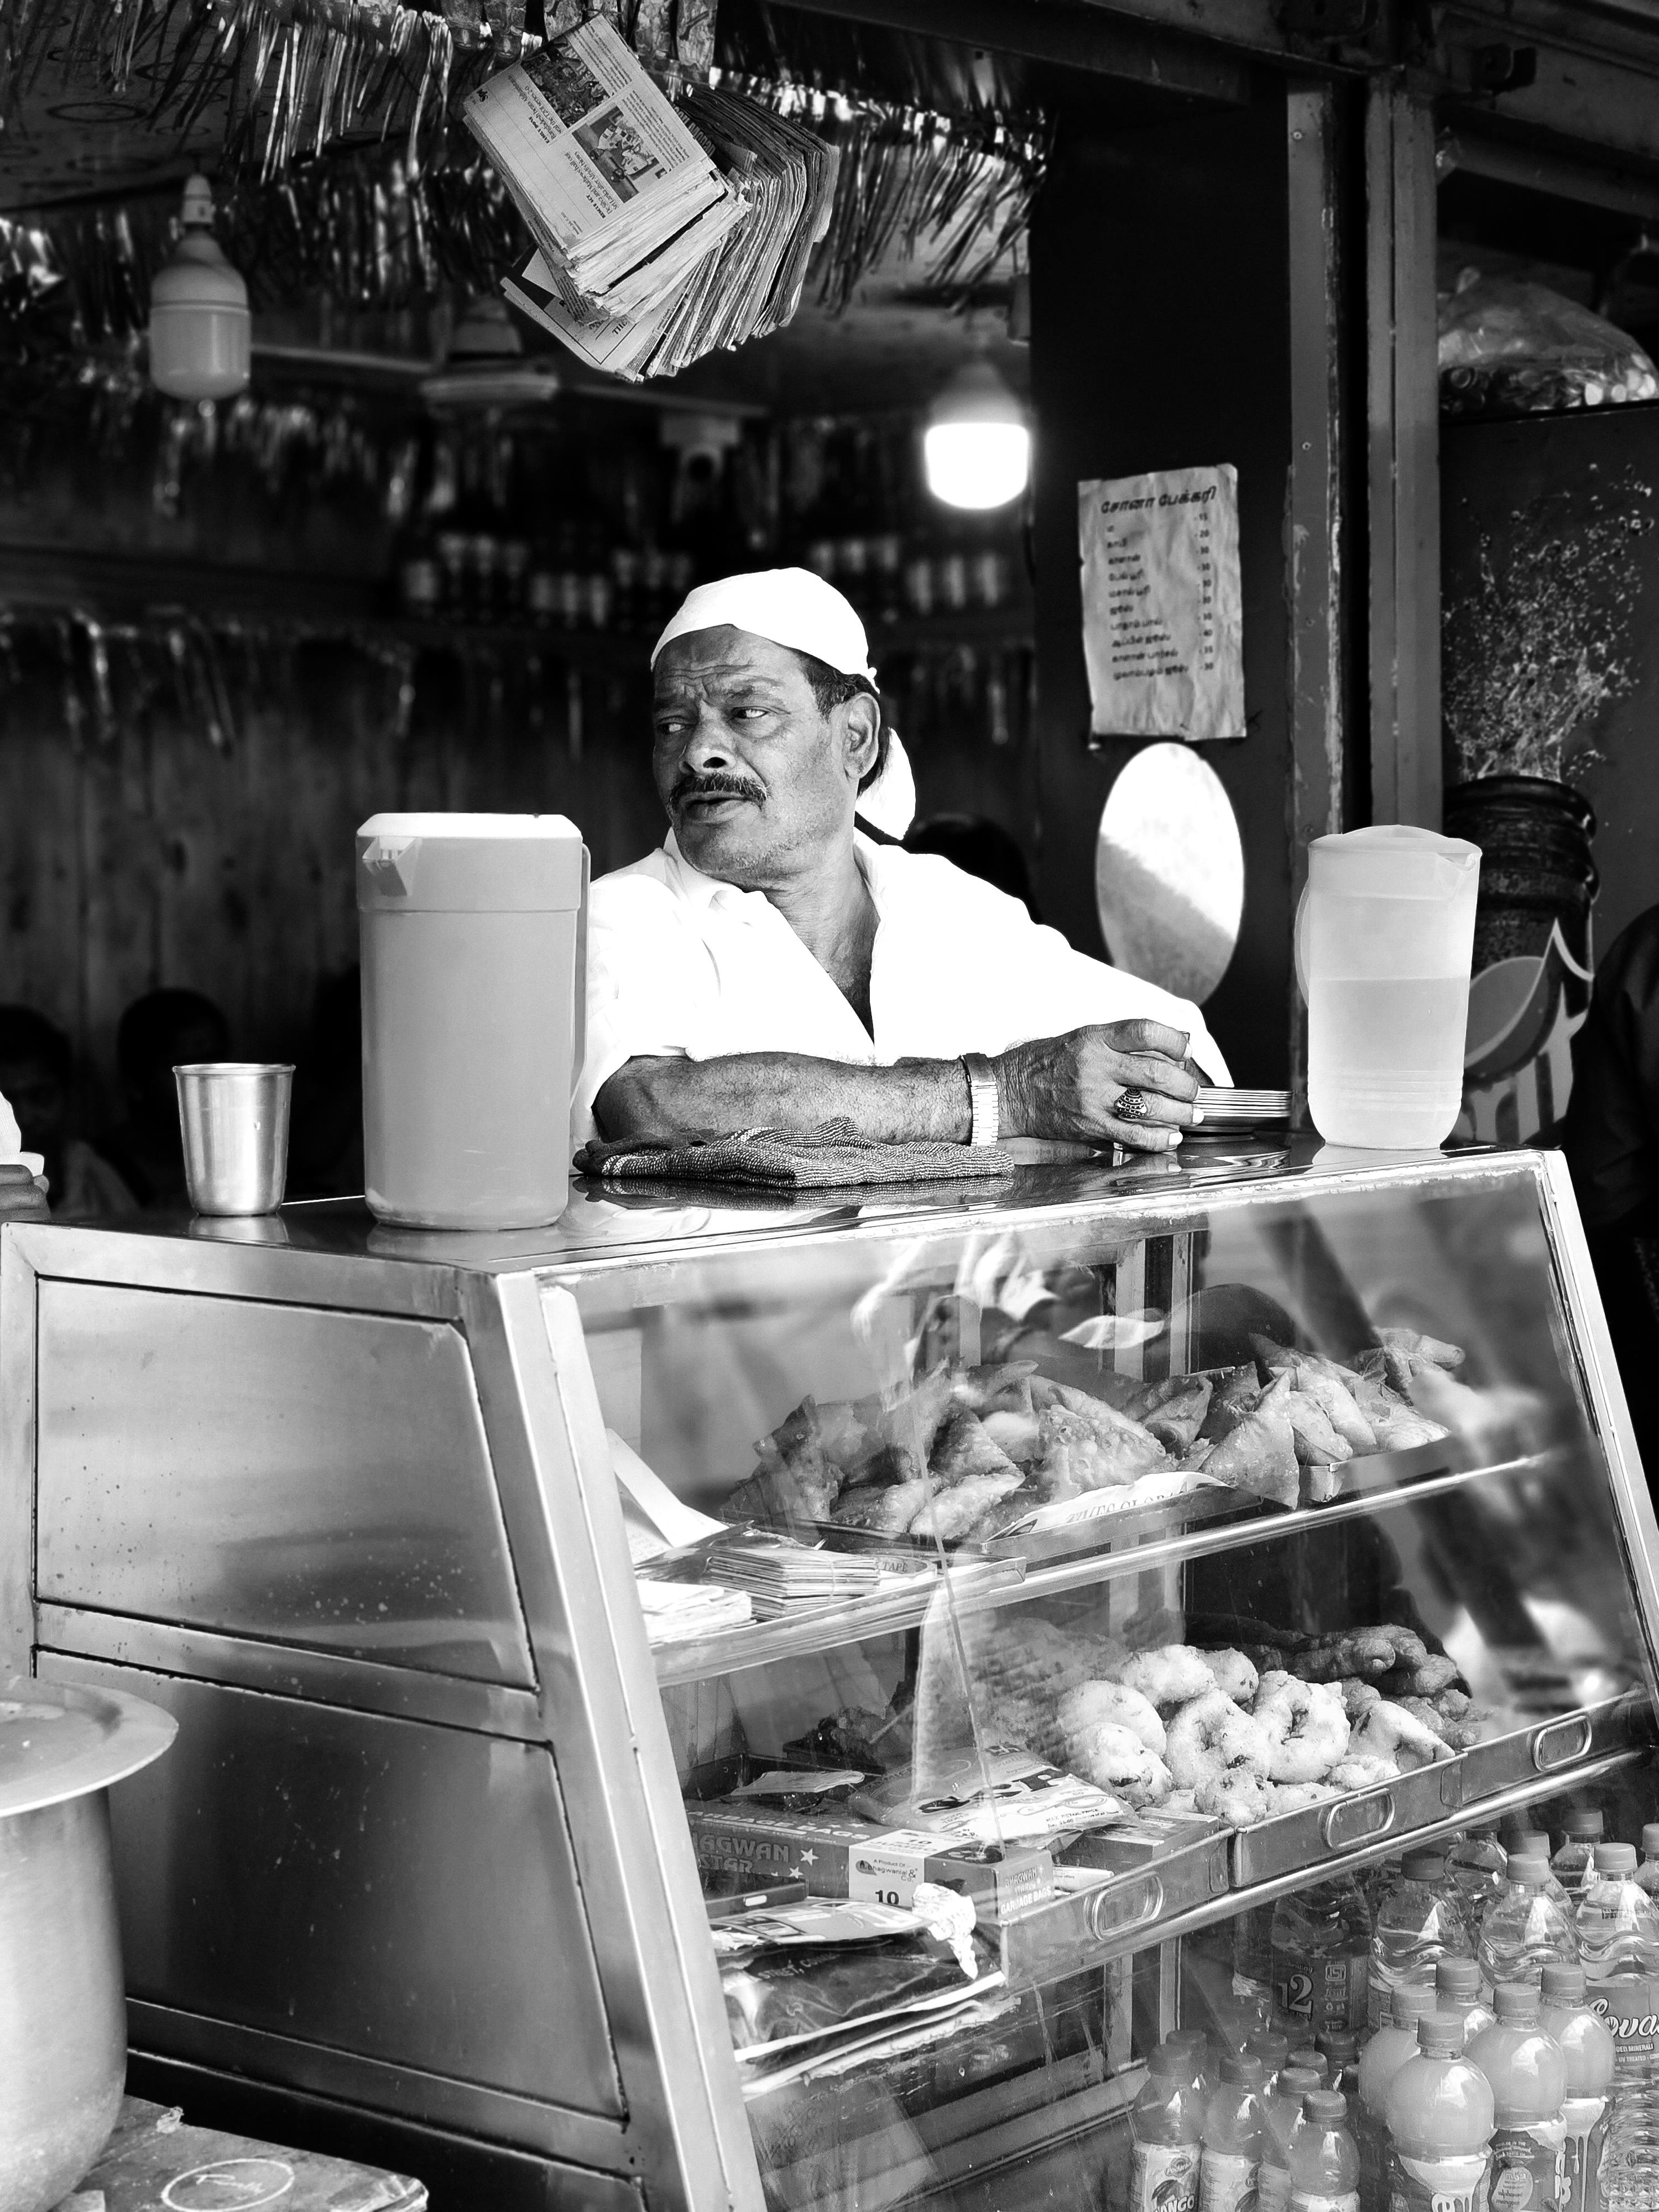 man selling food on a street market in black and white